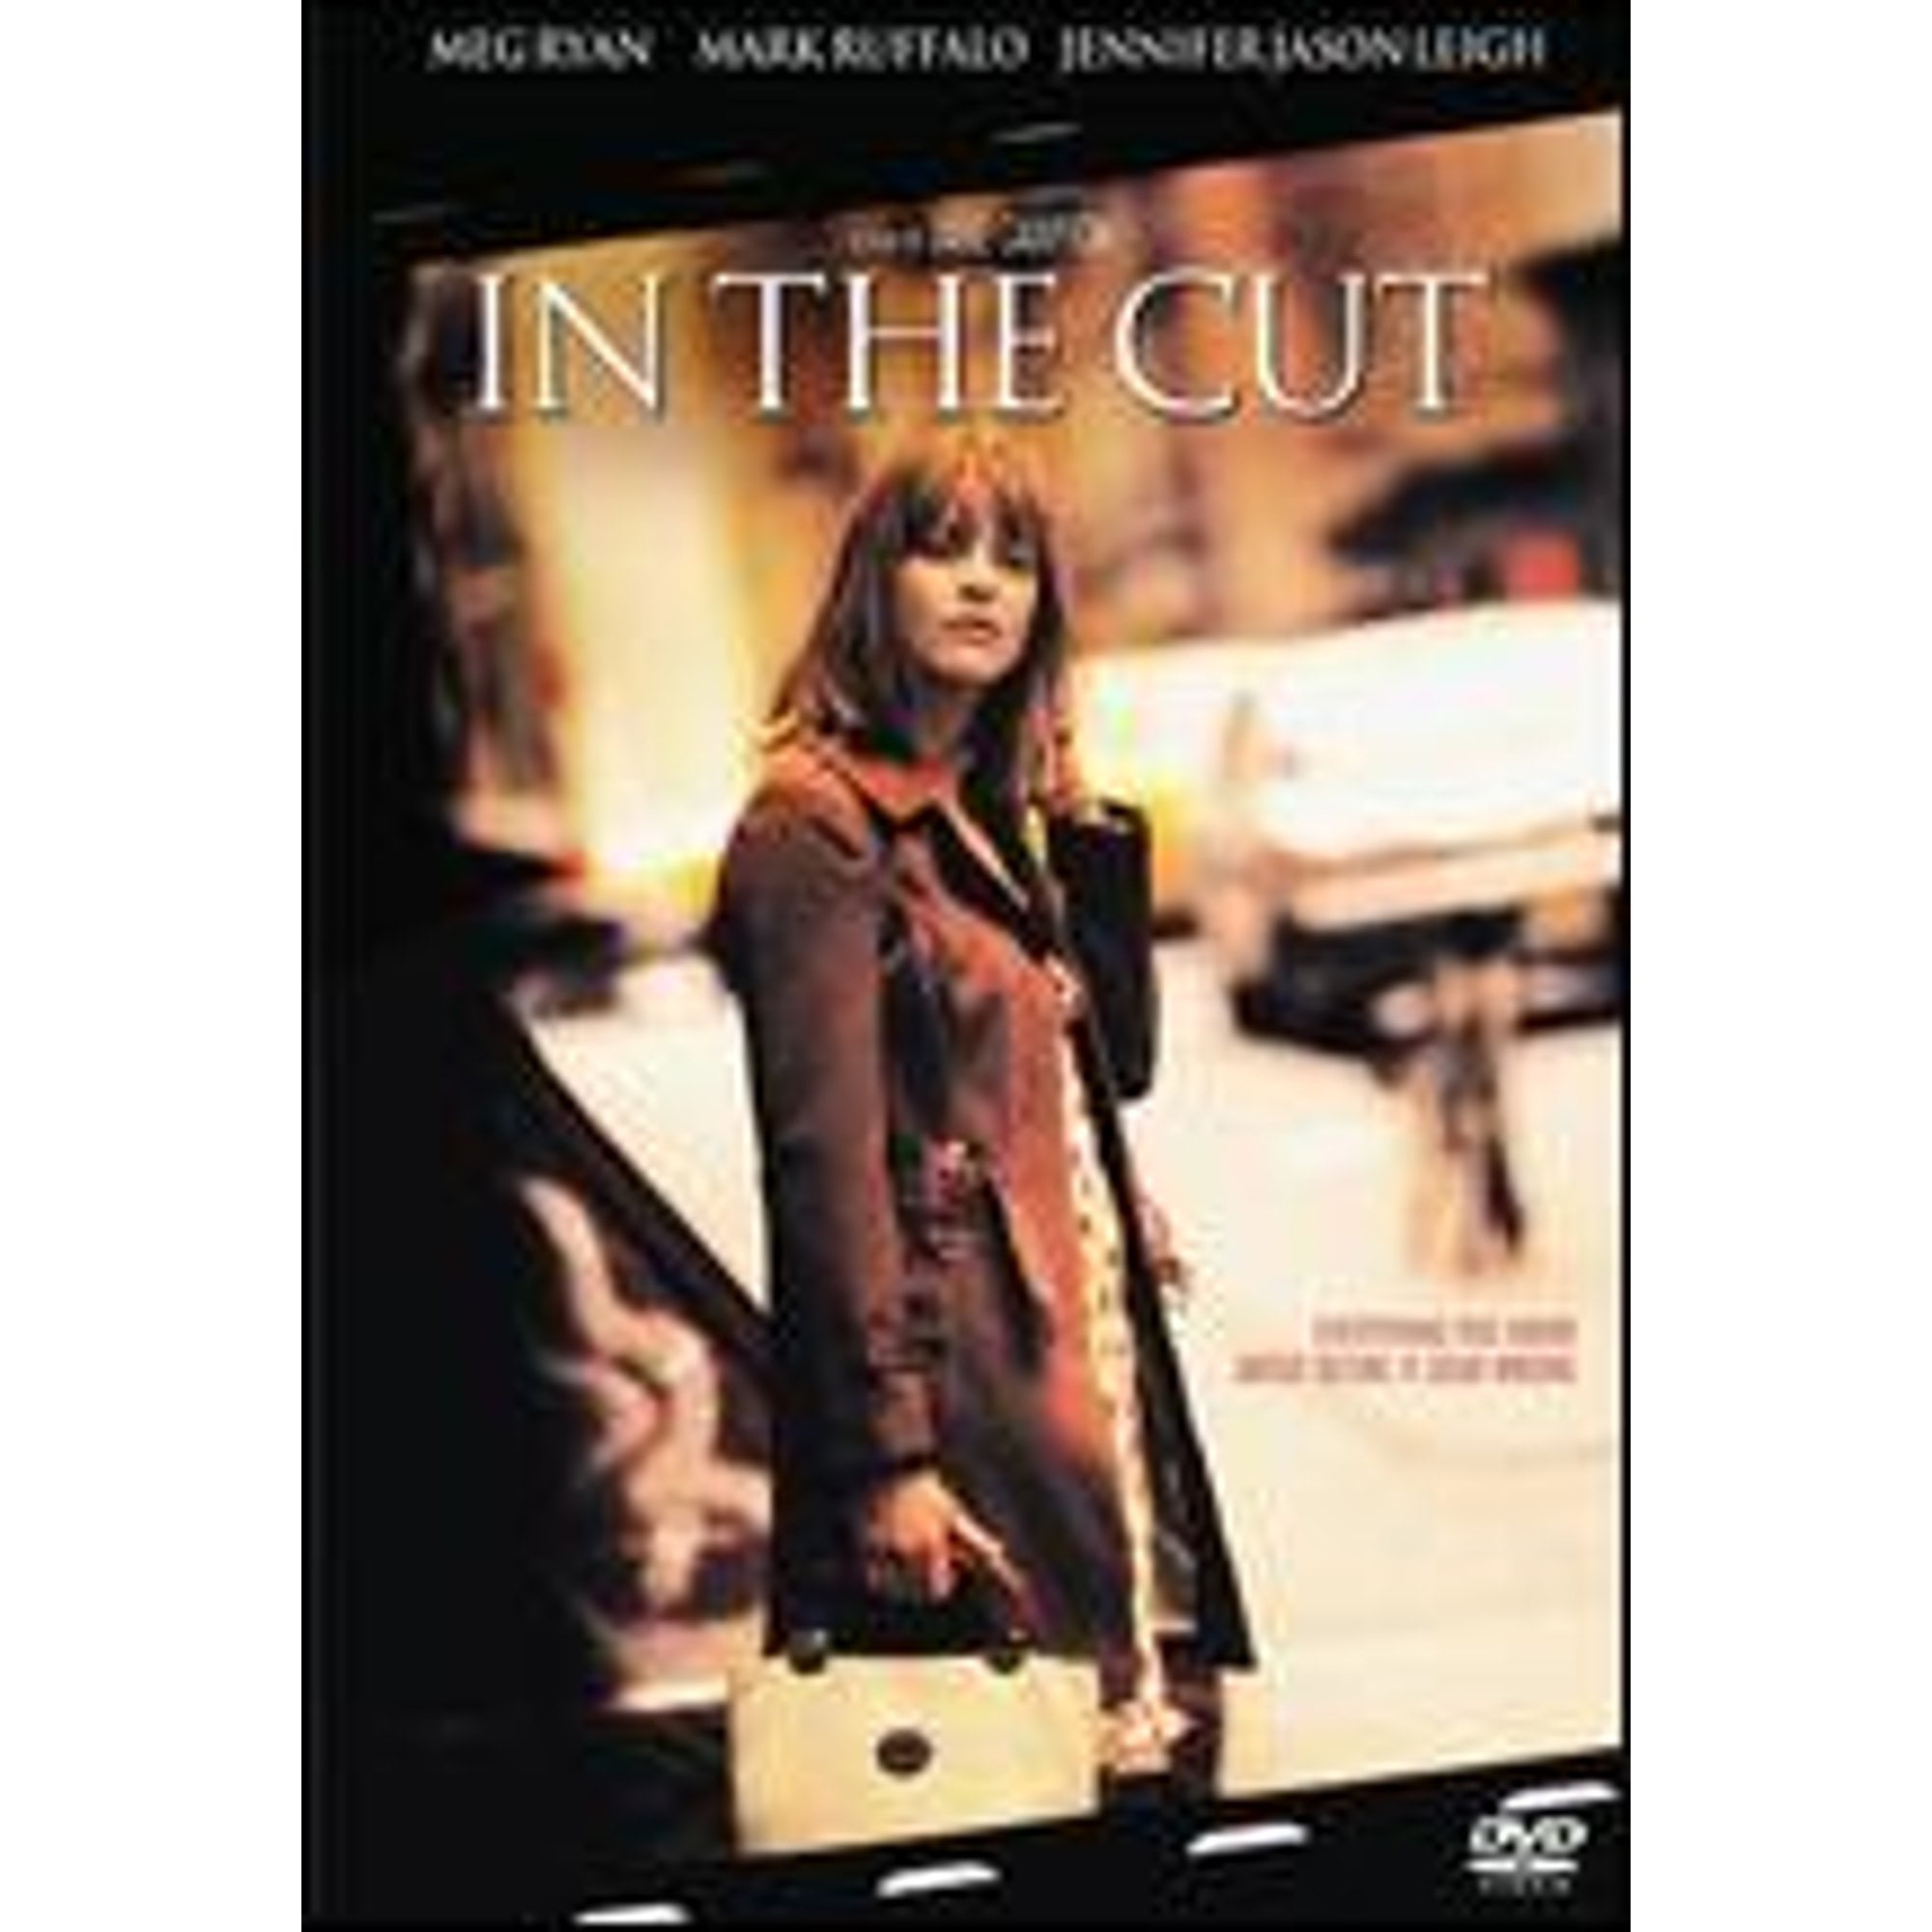 Pre-Owned In the Cut (DVD 0043396006973) directed by Jane Campion